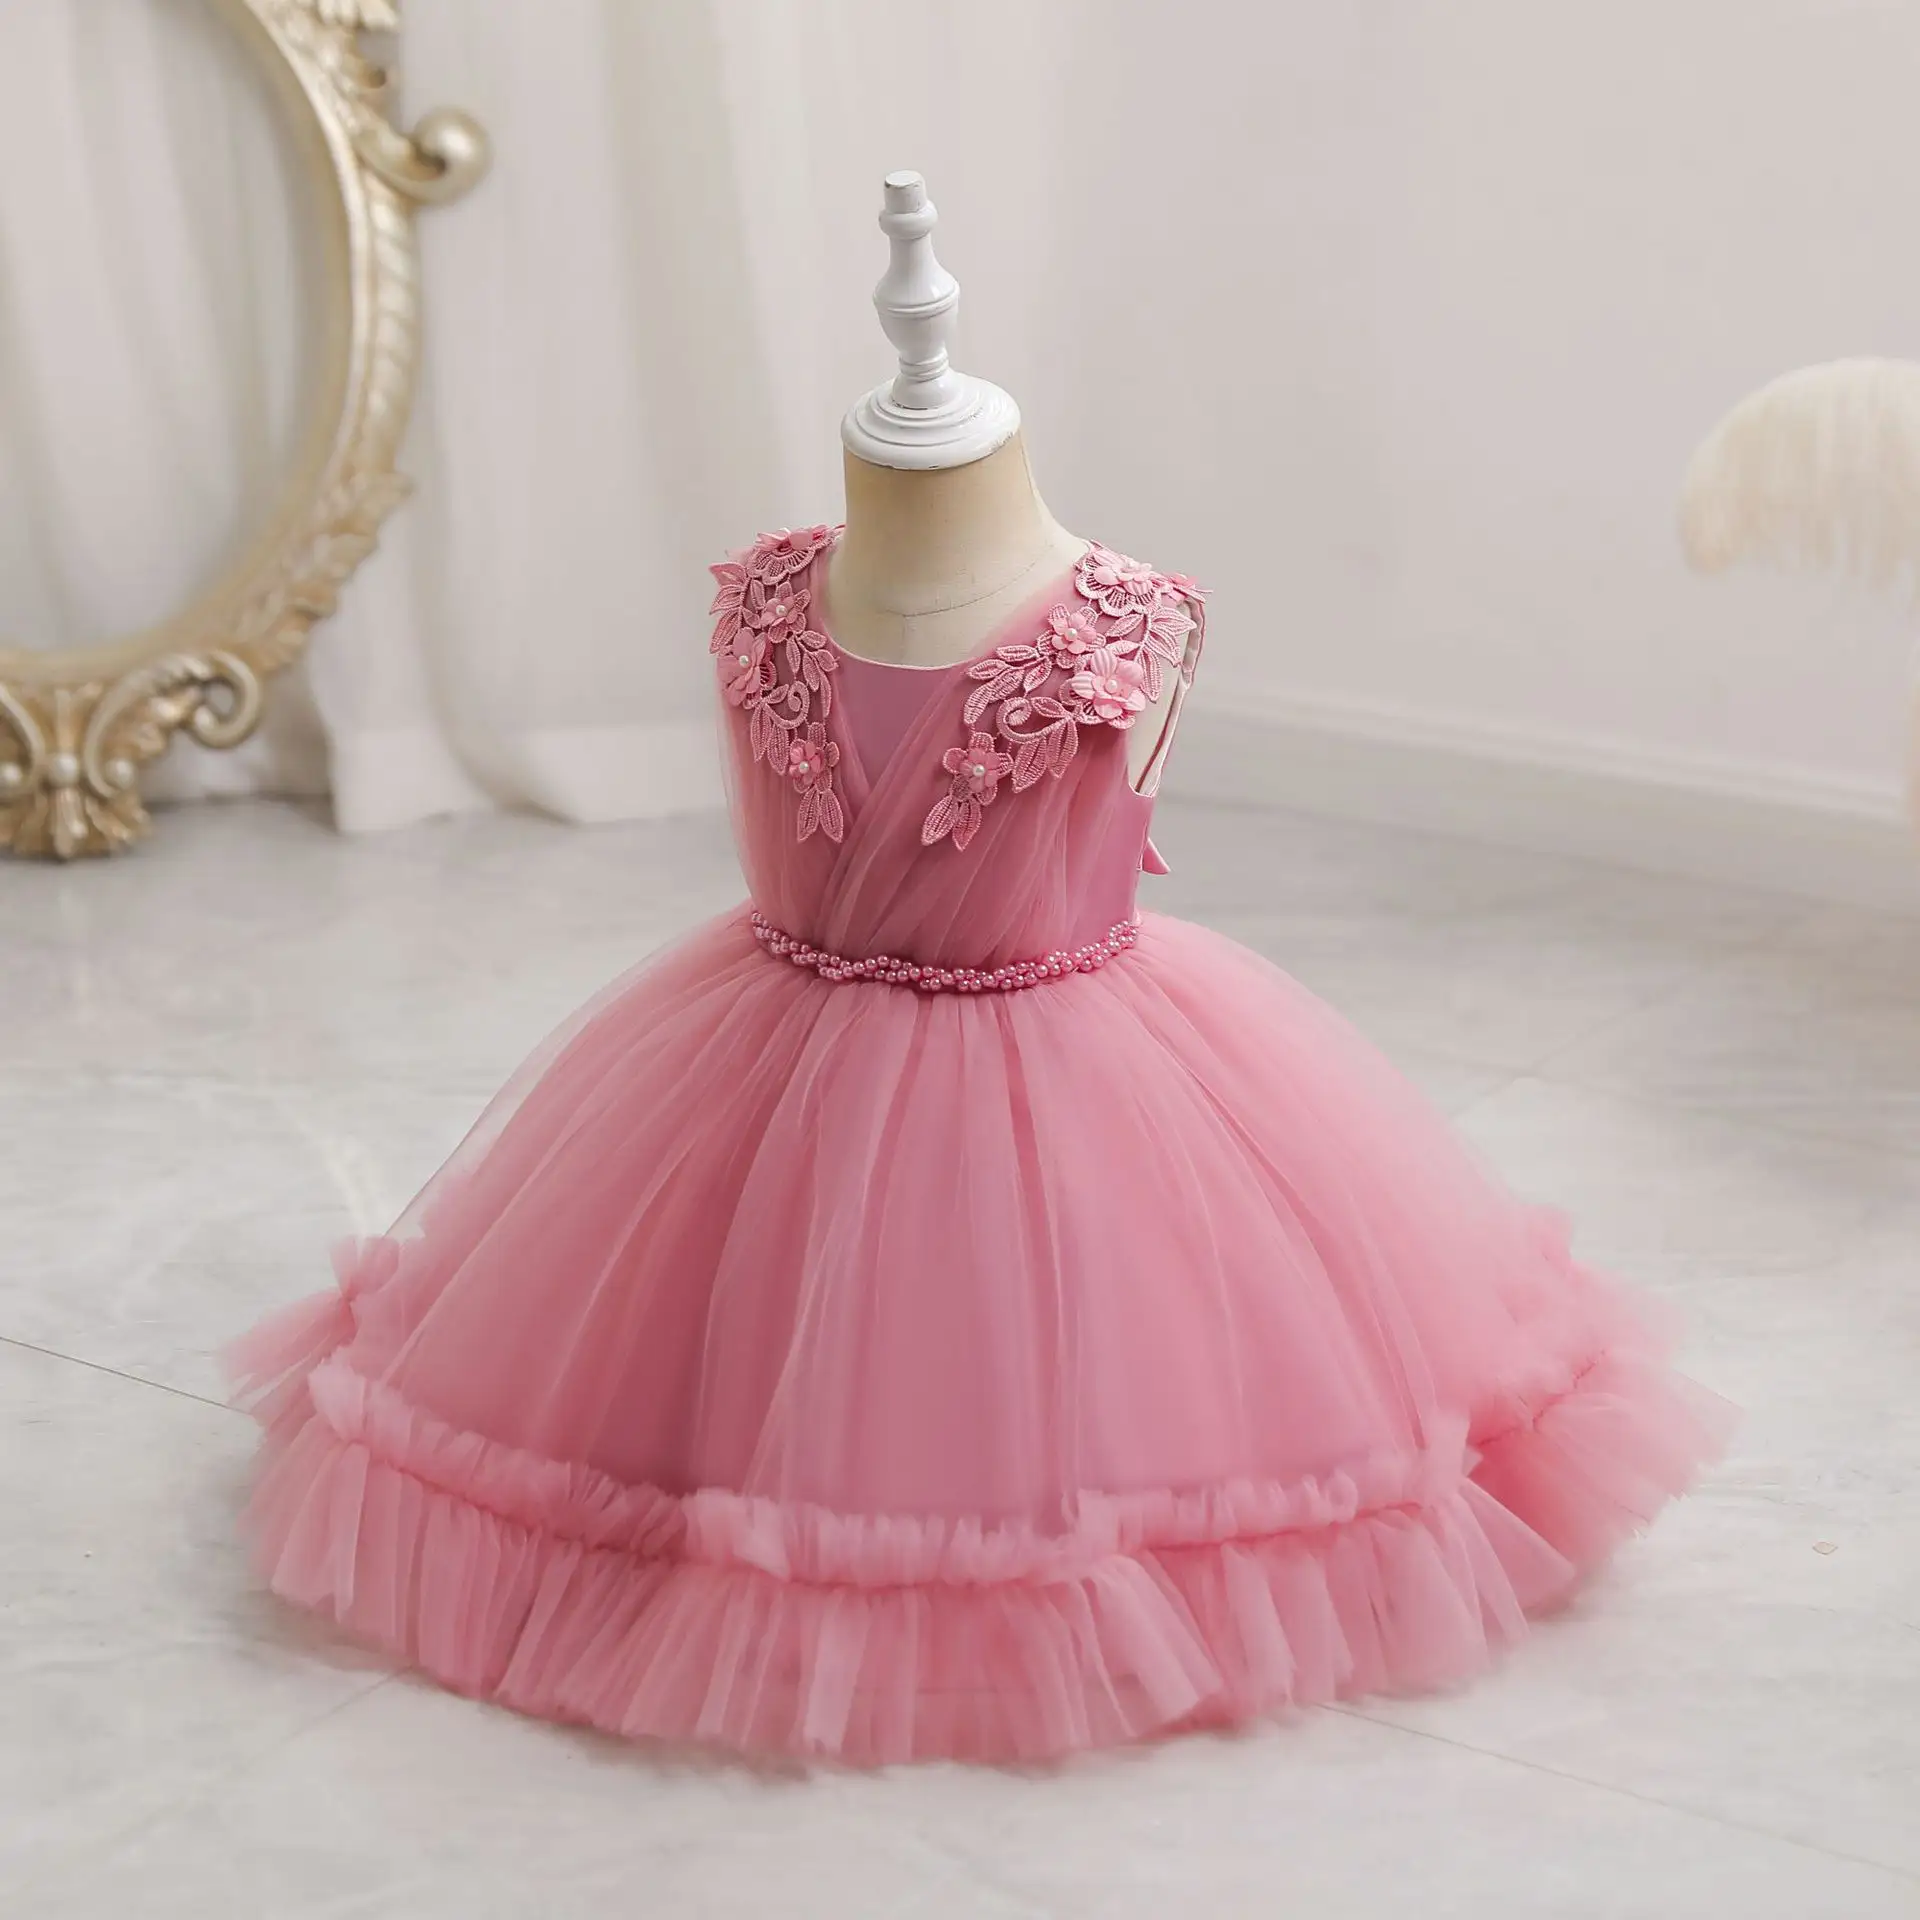 Infant Baby Girls Dresses Hand Made Smocked Embroidery Children Clothes Wholesale